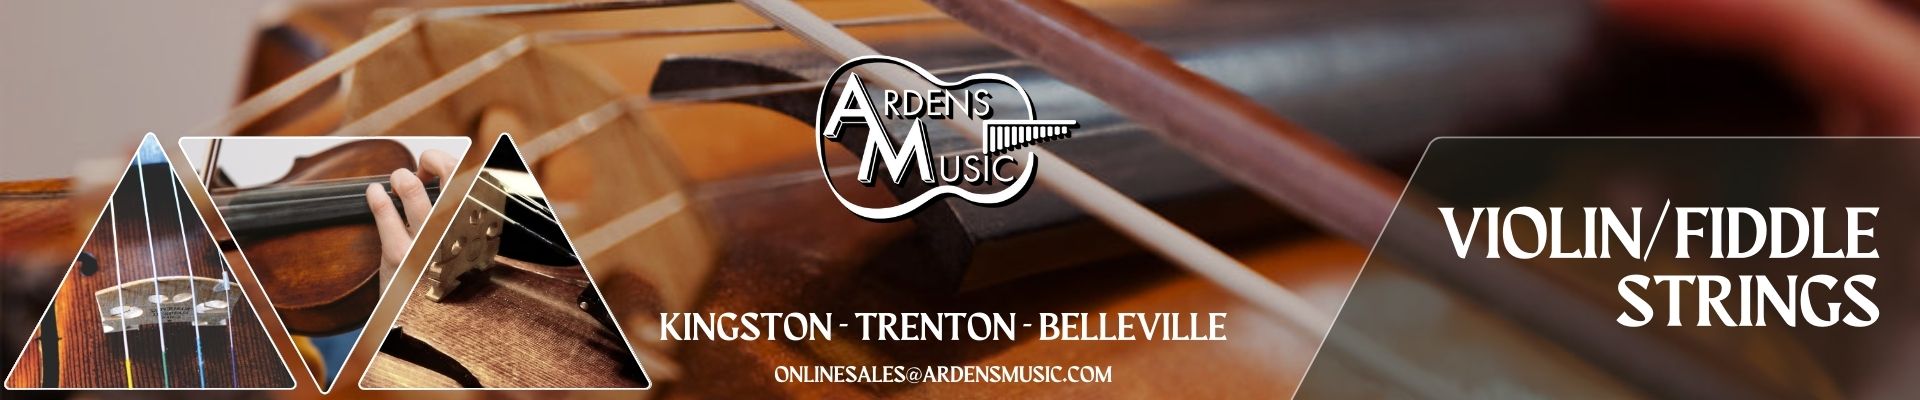 Did you know we offer a restring service? swing by your local Ardens Music with a set of strings or drop by and purchase a set and we will restring your guitar for just $10!